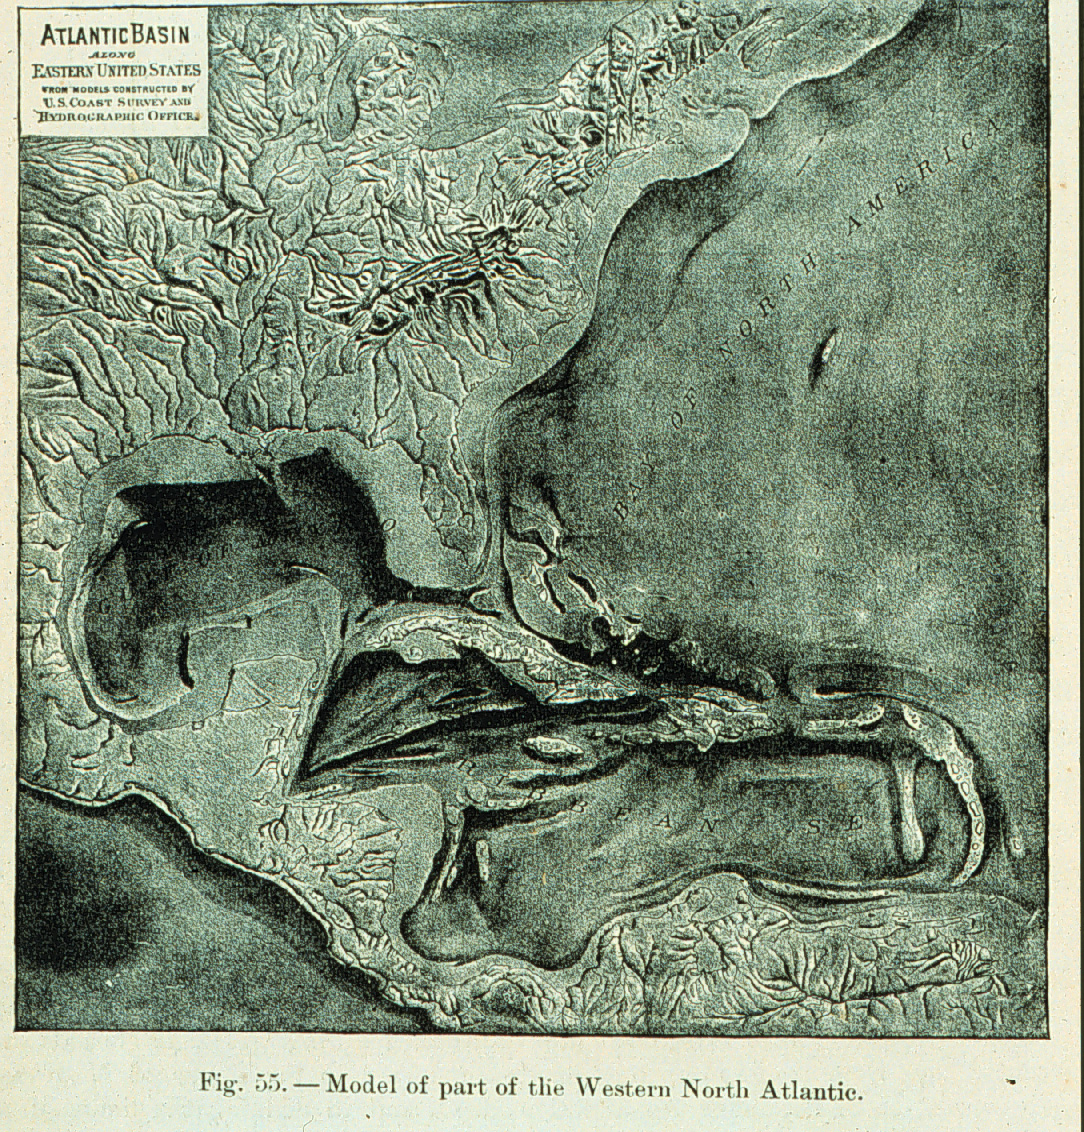 3-D view of the Gulf of Mexico, Eastern U